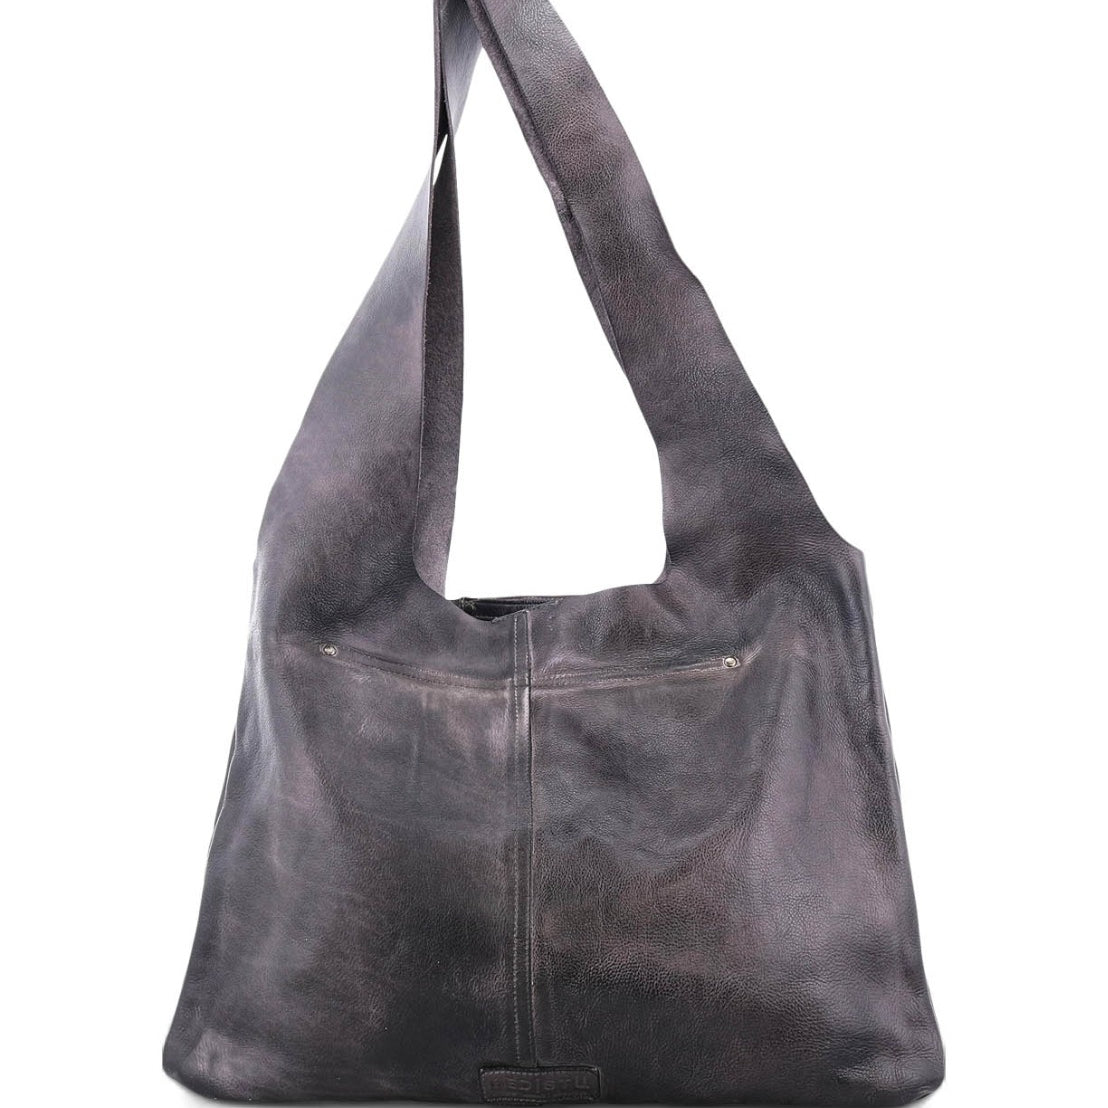 An Ariel grey leather hobo bag on a white background by Bed Stu.